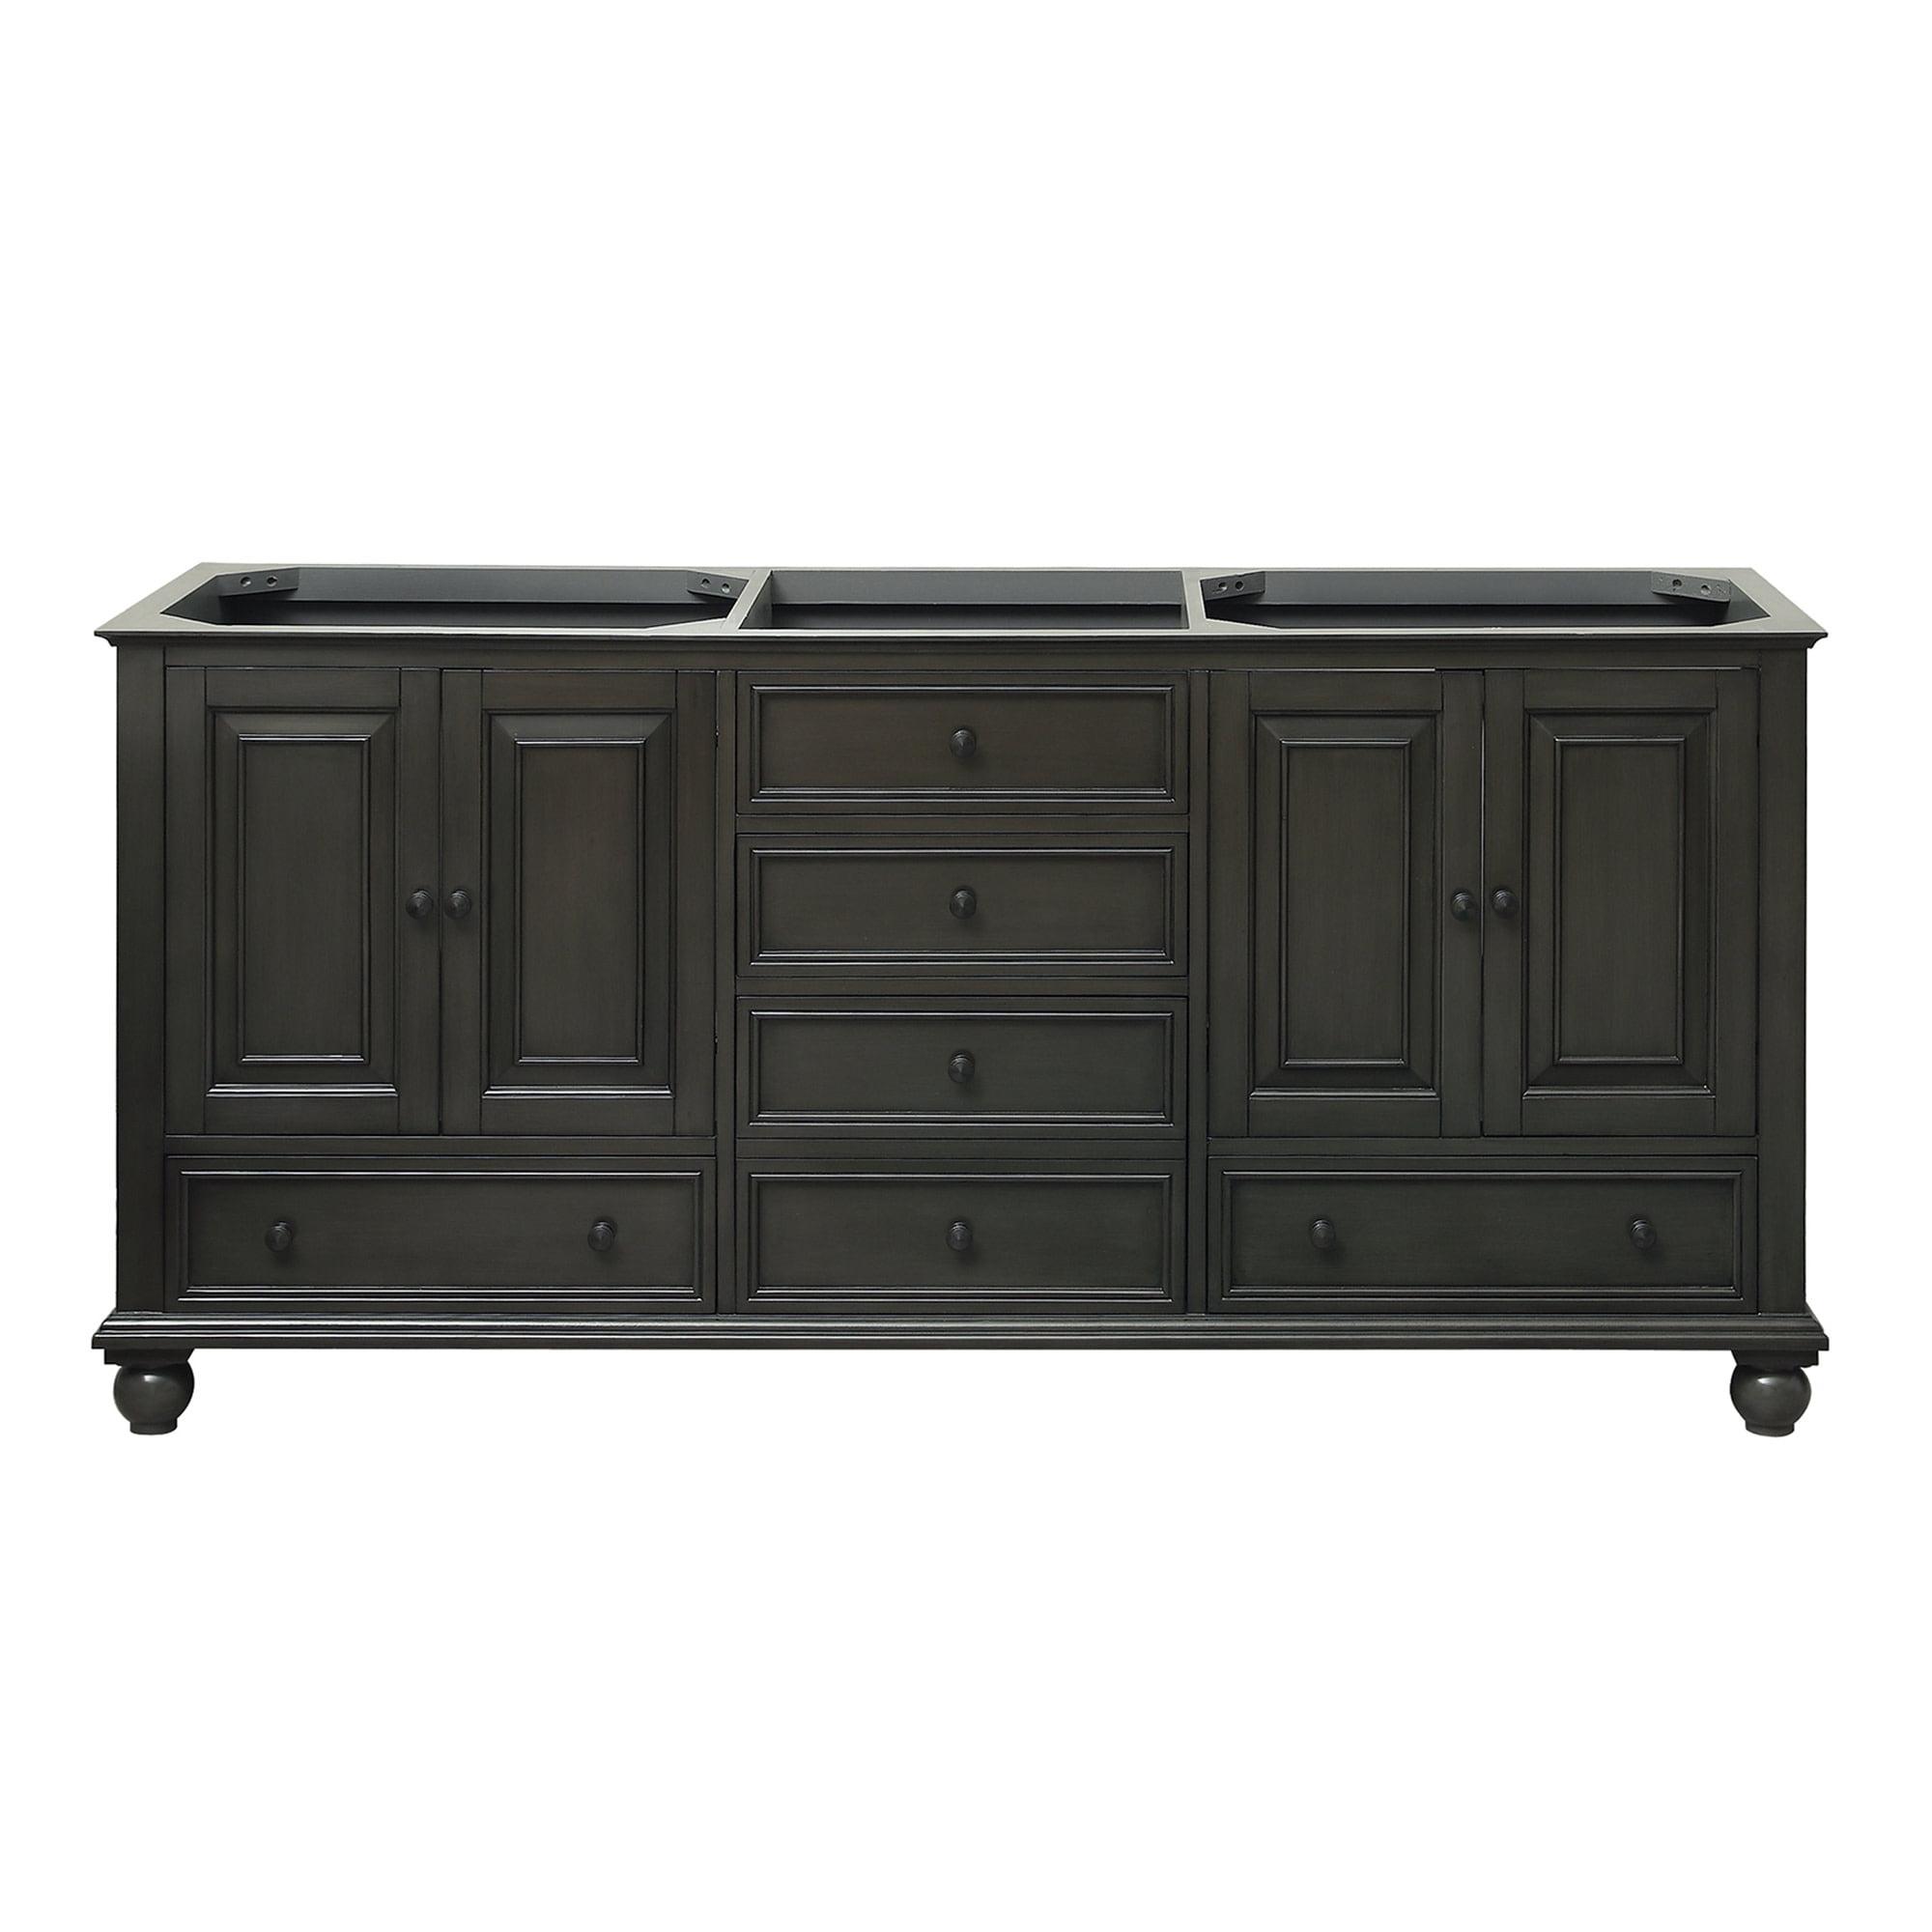 Transitional Charcoal Glaze 72" Solid Wood Double Vanity Cabinet